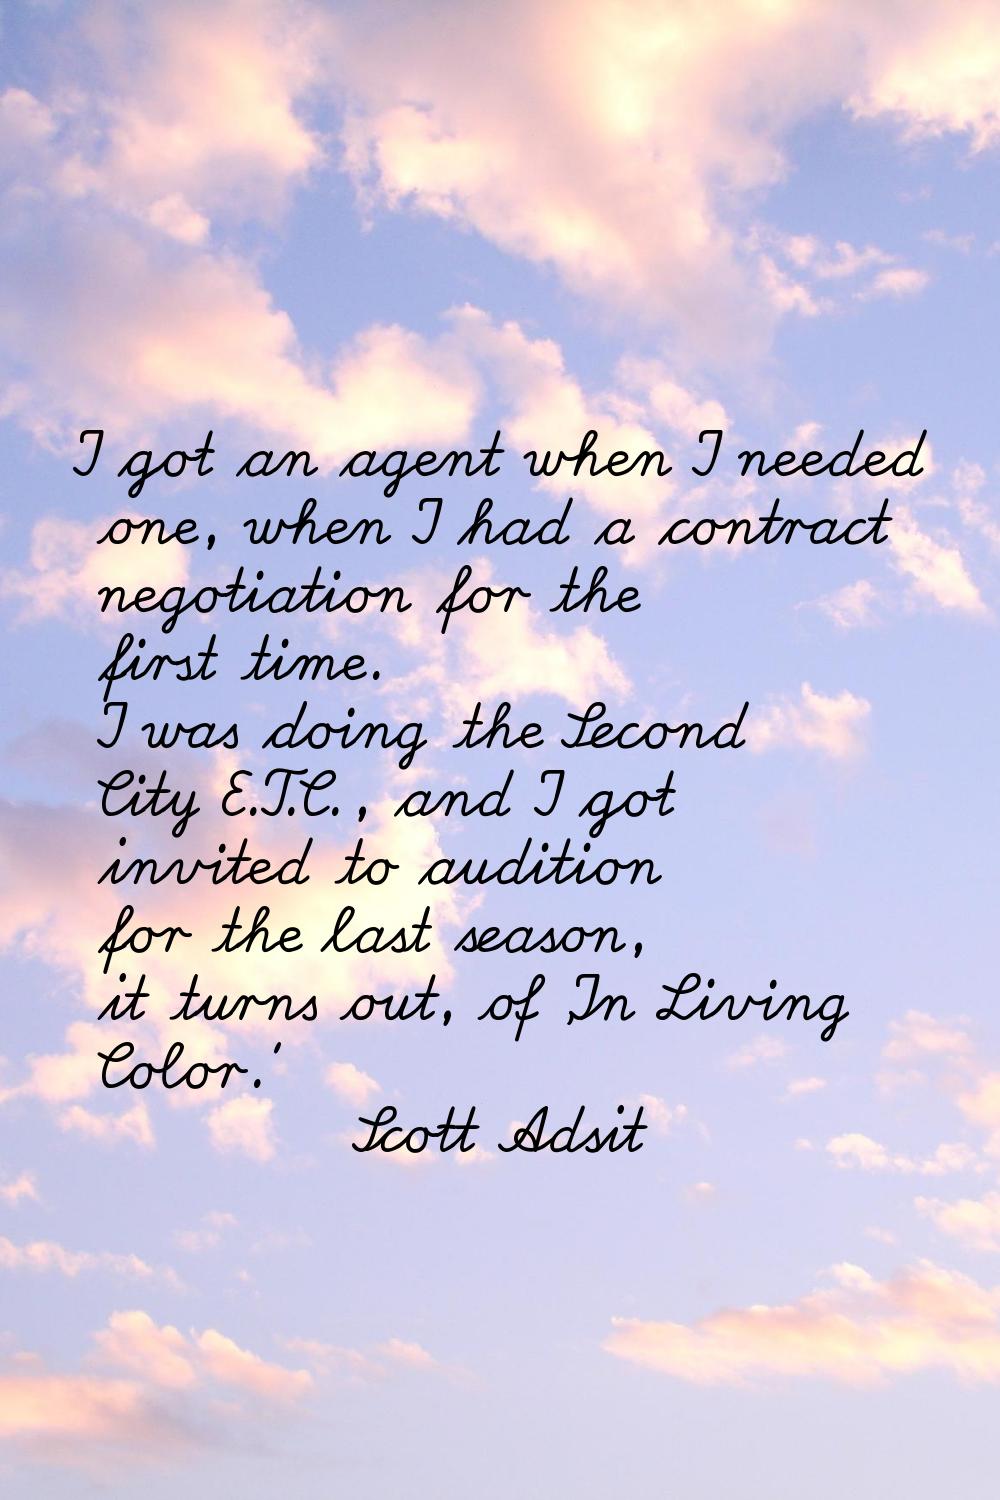 I got an agent when I needed one, when I had a contract negotiation for the first time. I was doing